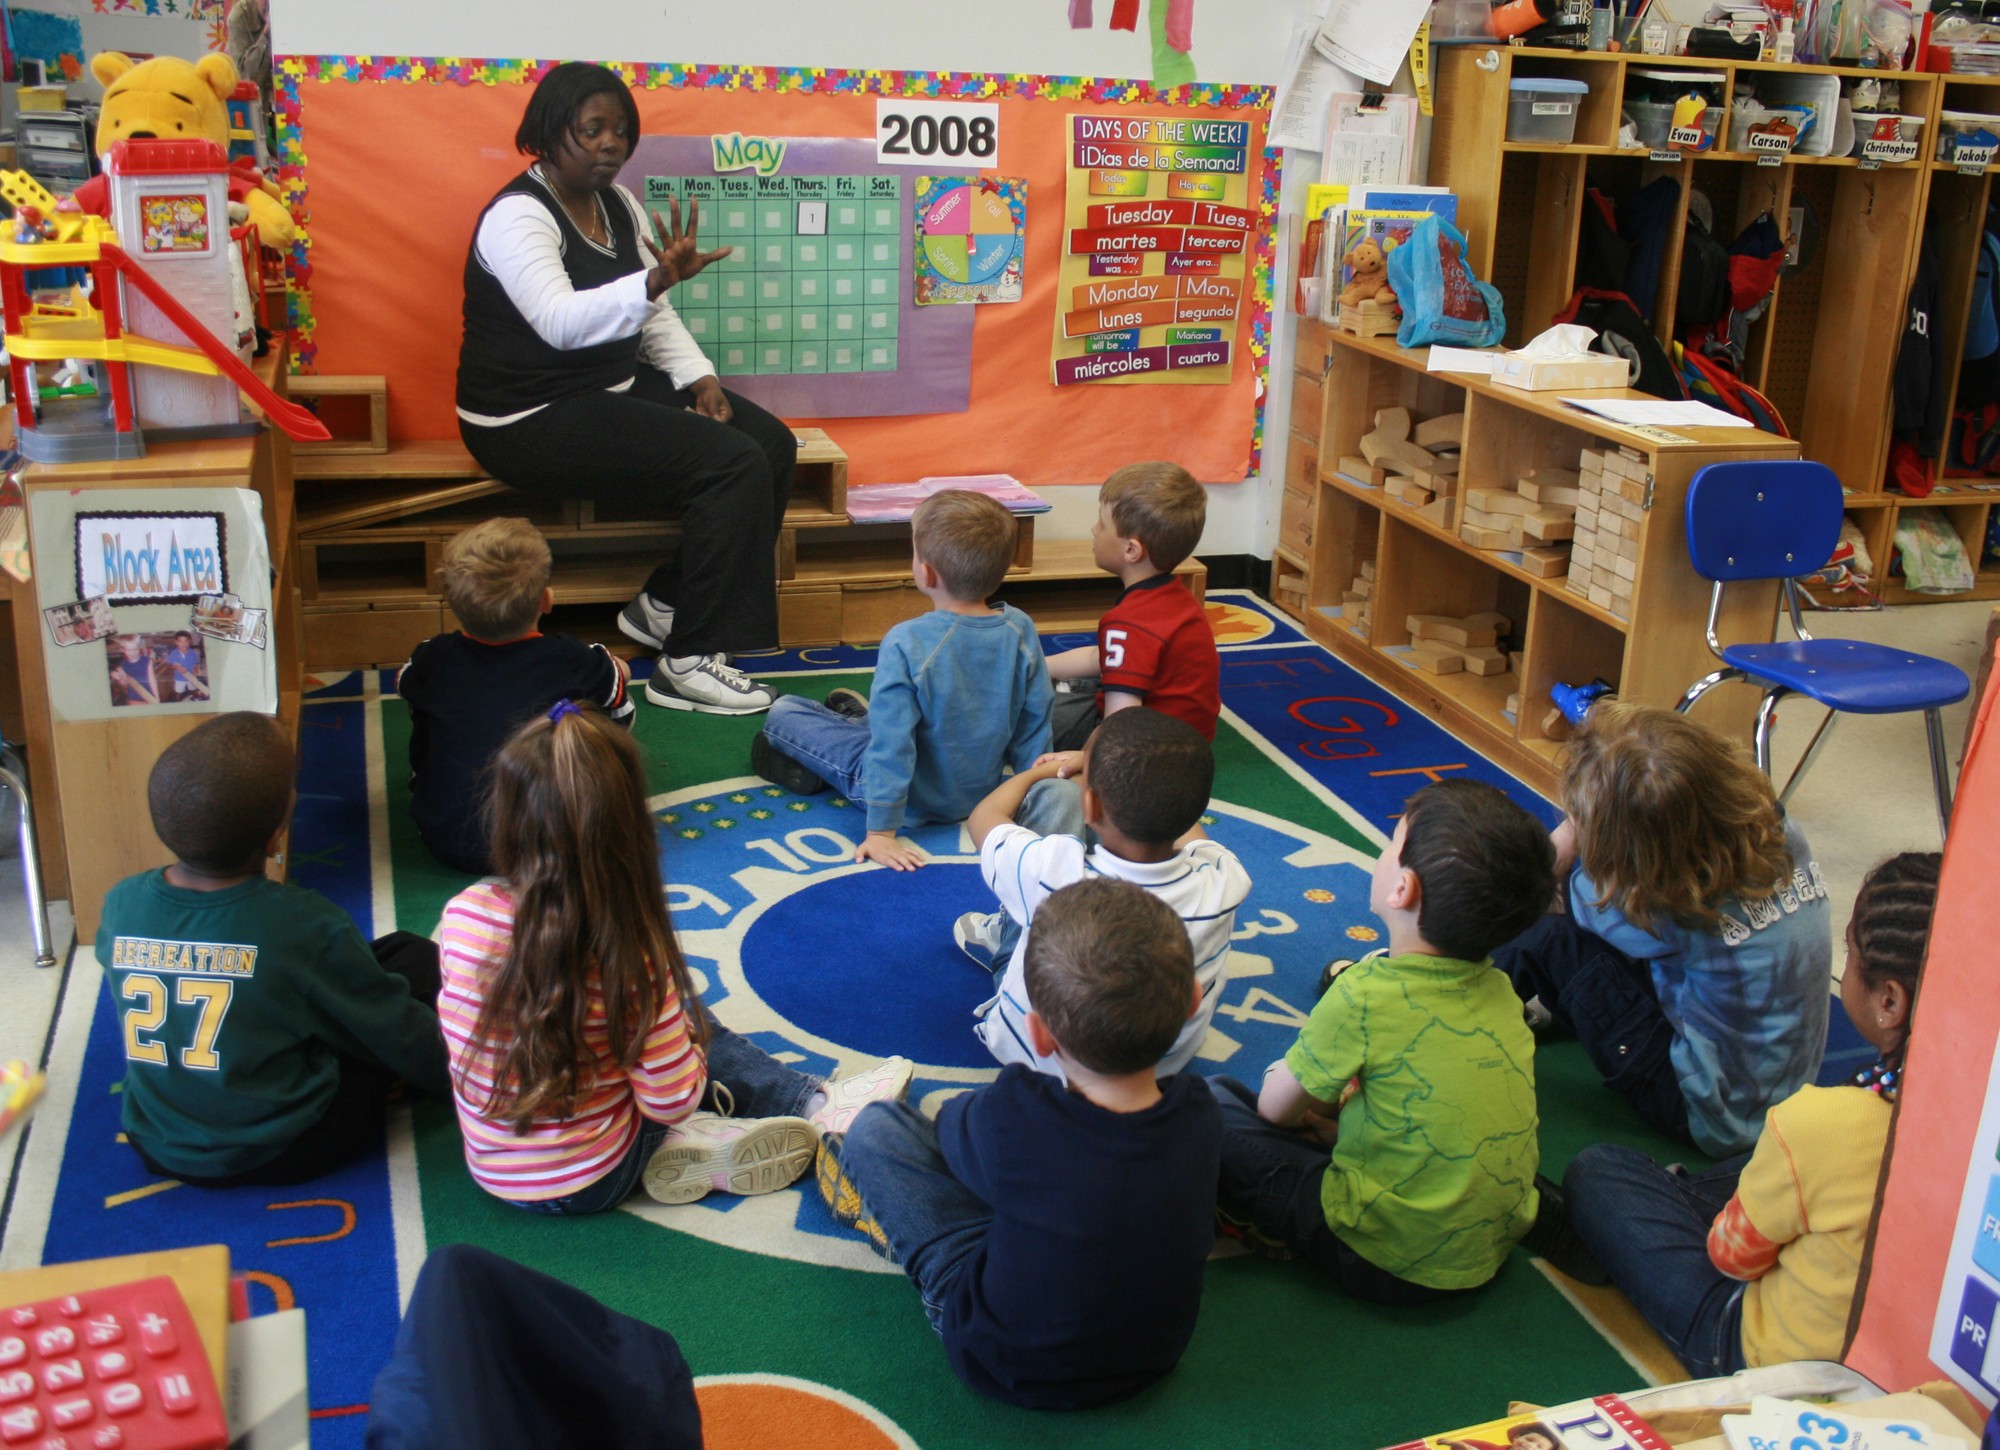 A teacher leads carpet time for her classroom community.